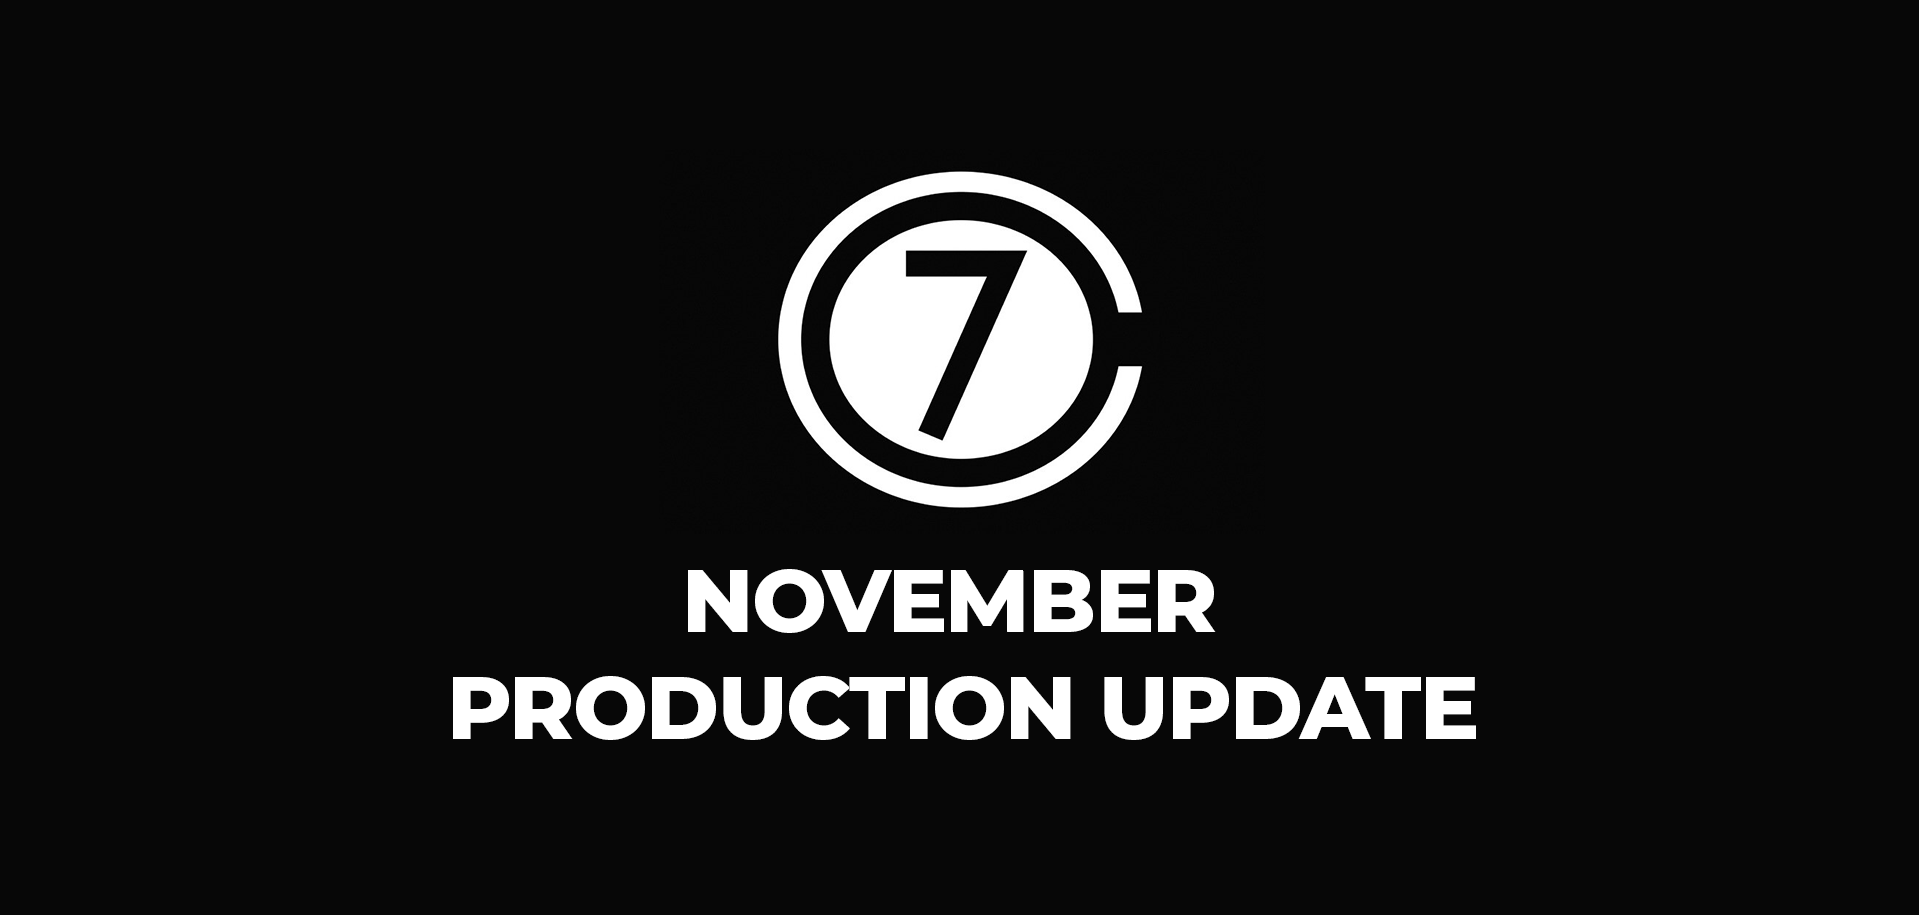 Cubicle 7 Production Update